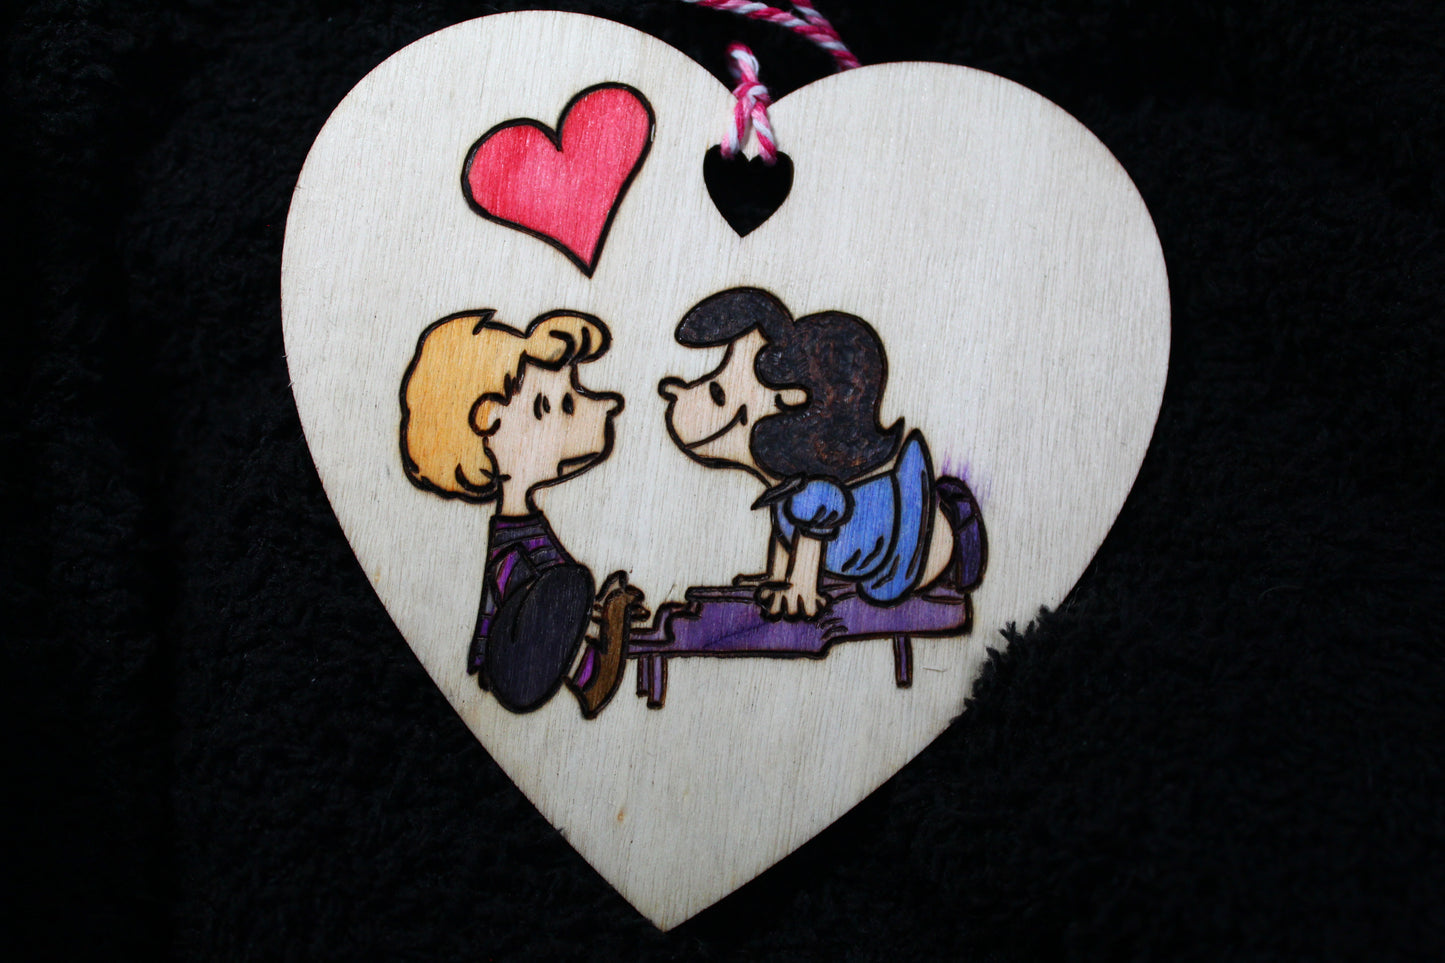 Valentines Ornaments "CLASSICAL LOVE" - 'Pyrographics by The Ragdoll Princess'